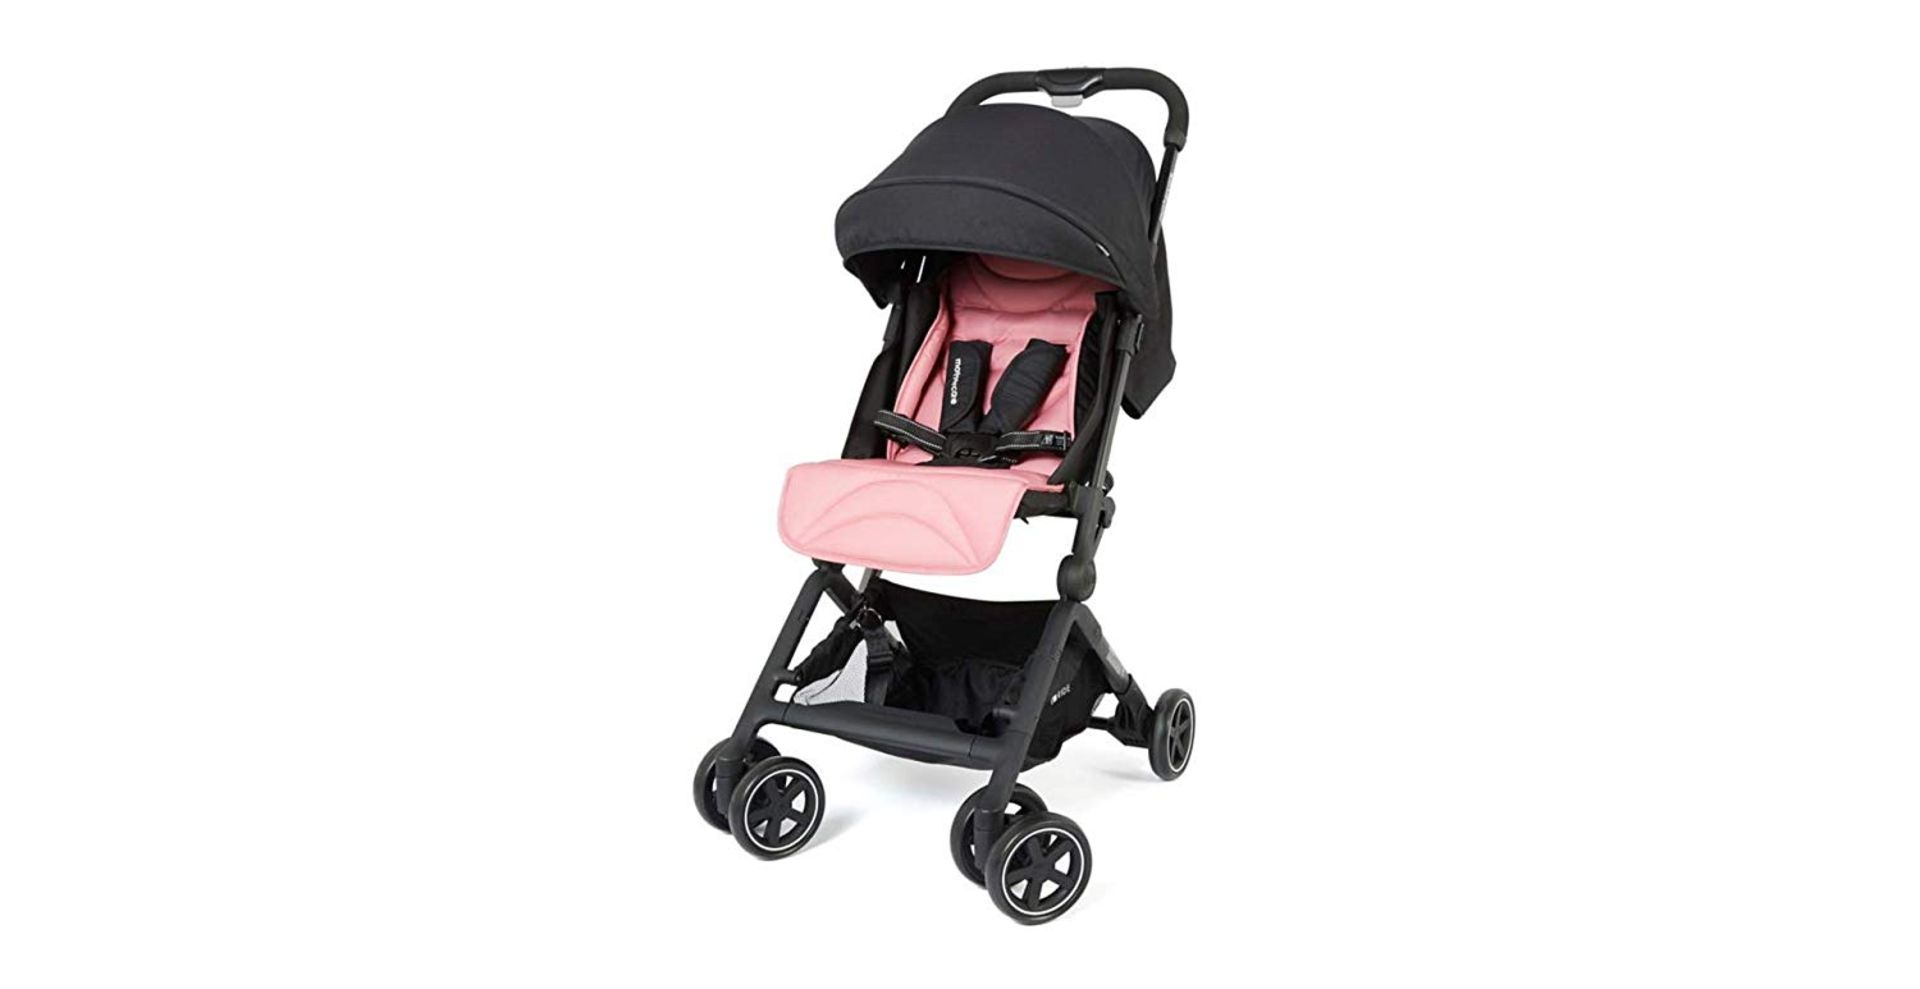 Mothercare Ride Stroller, Pink RRP £120